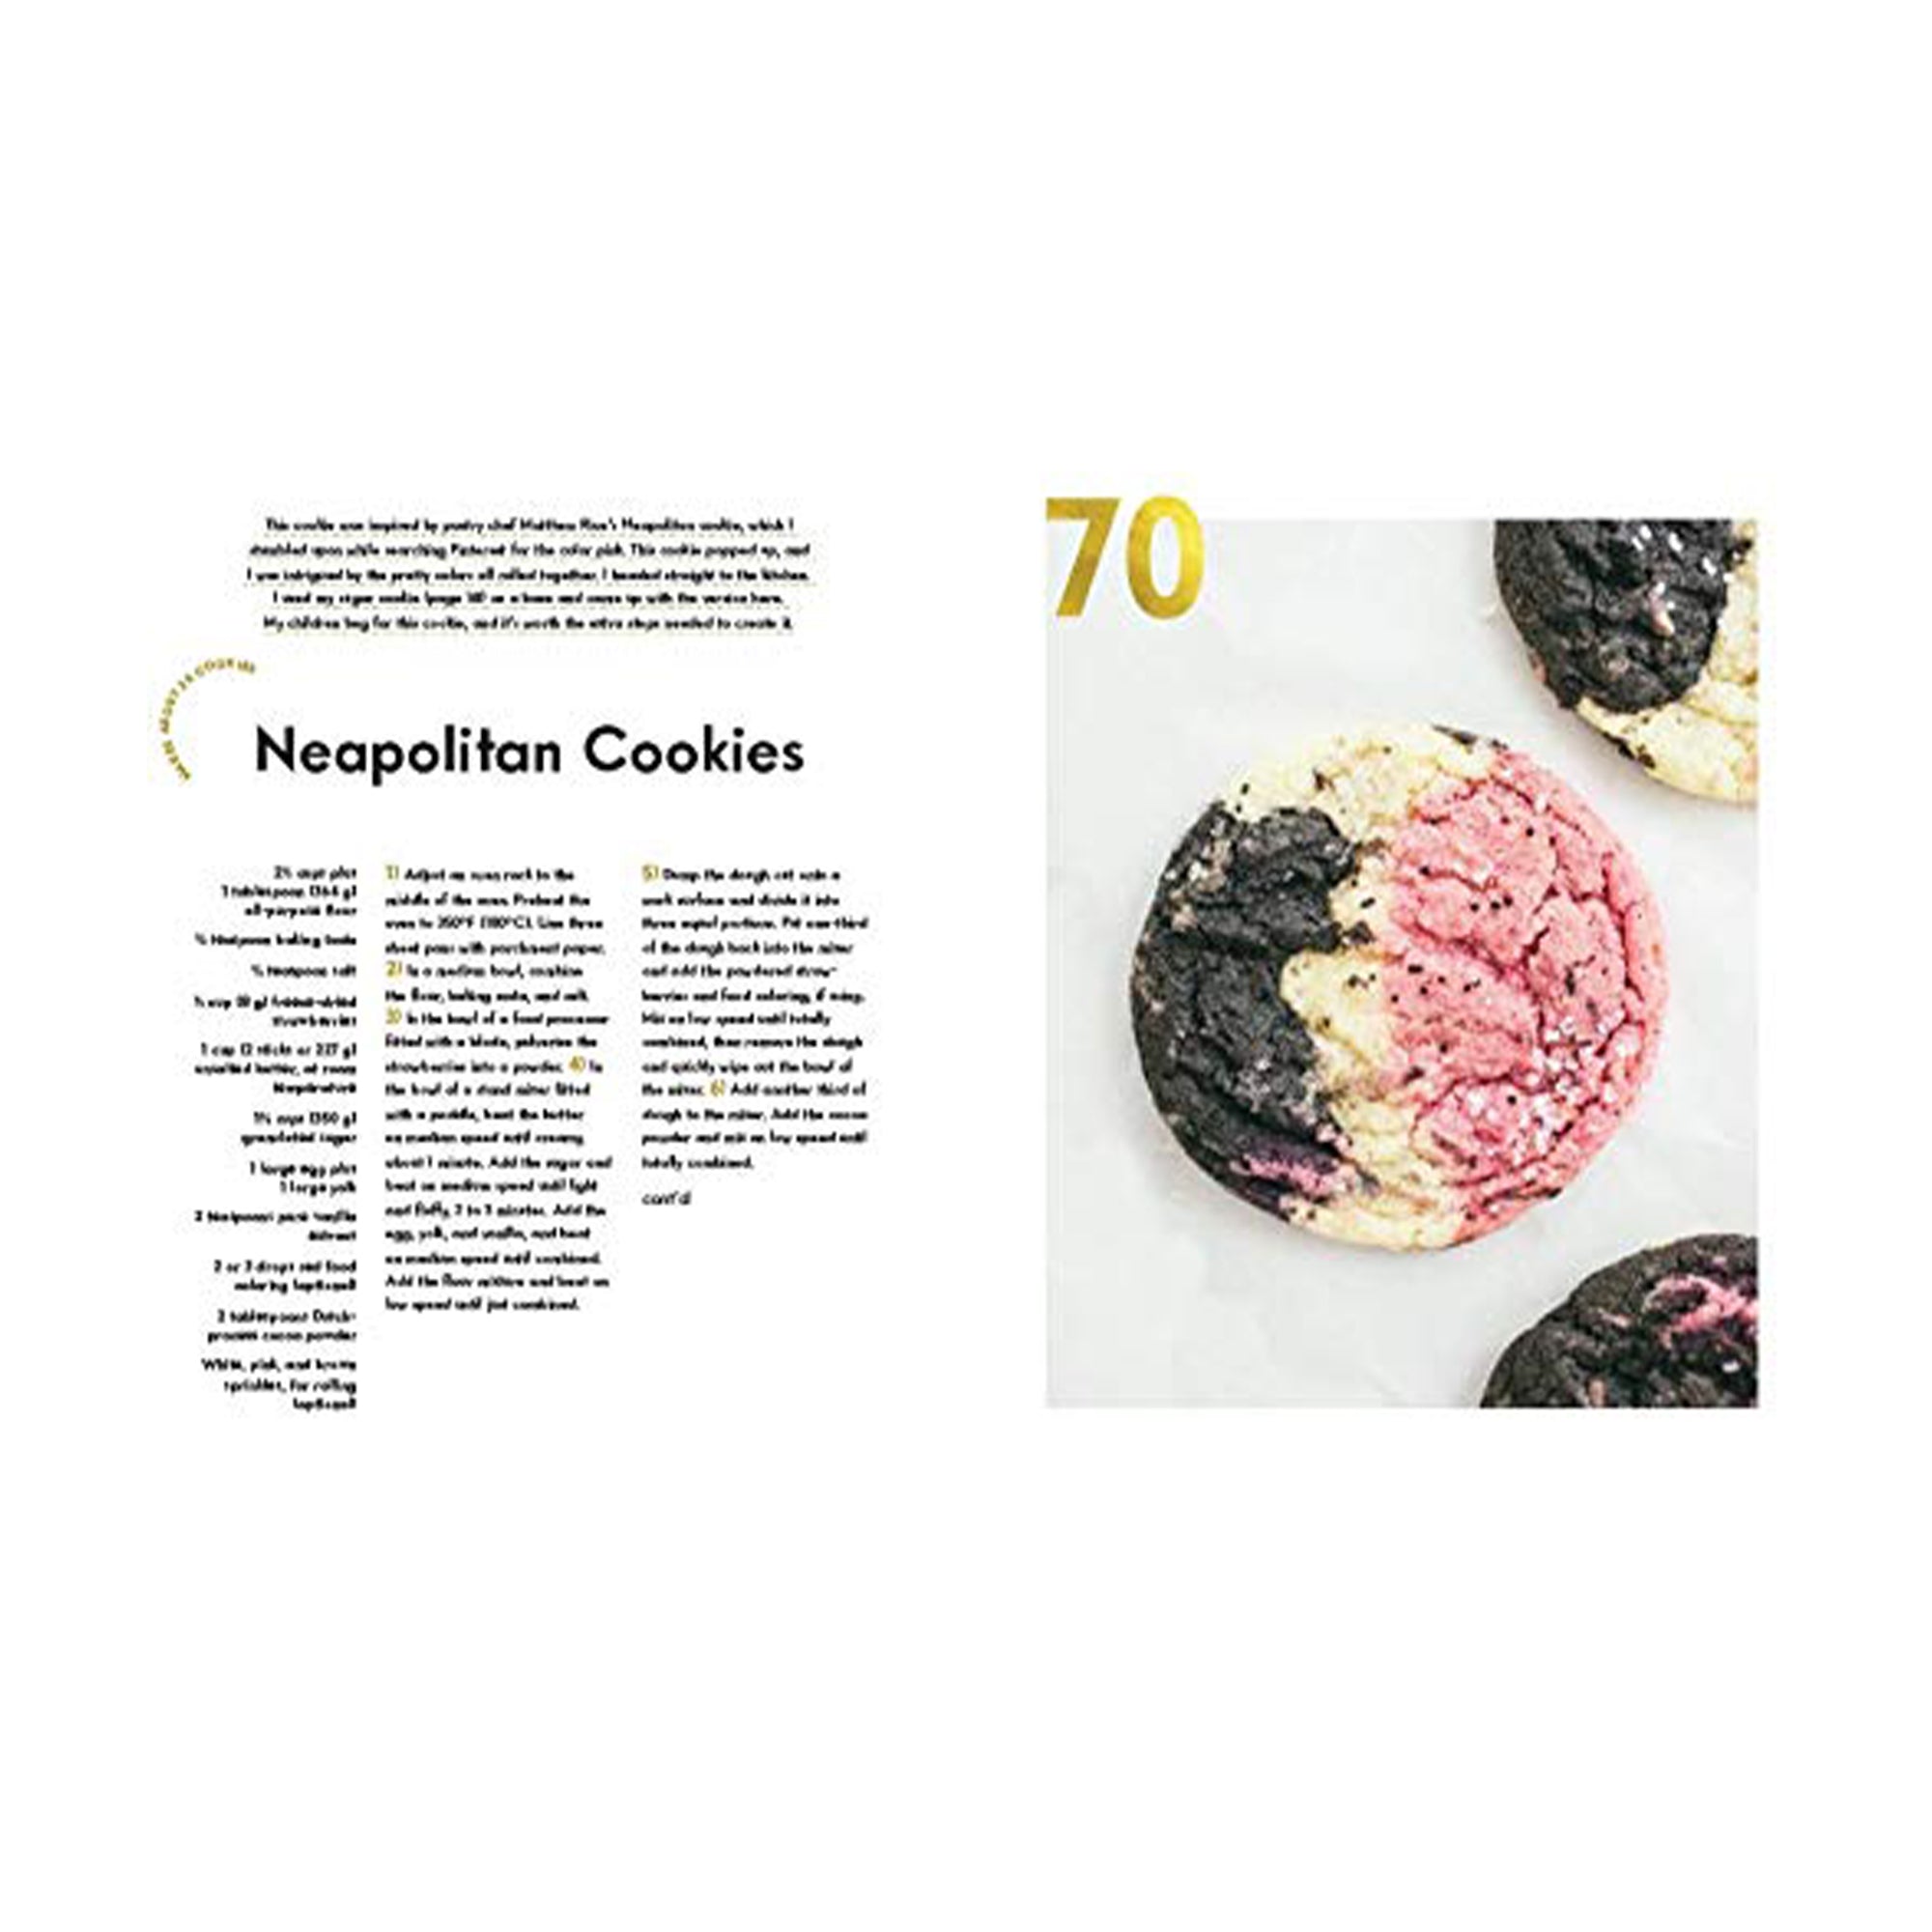 100 Cookies: The Baking Book for Every Kitchen